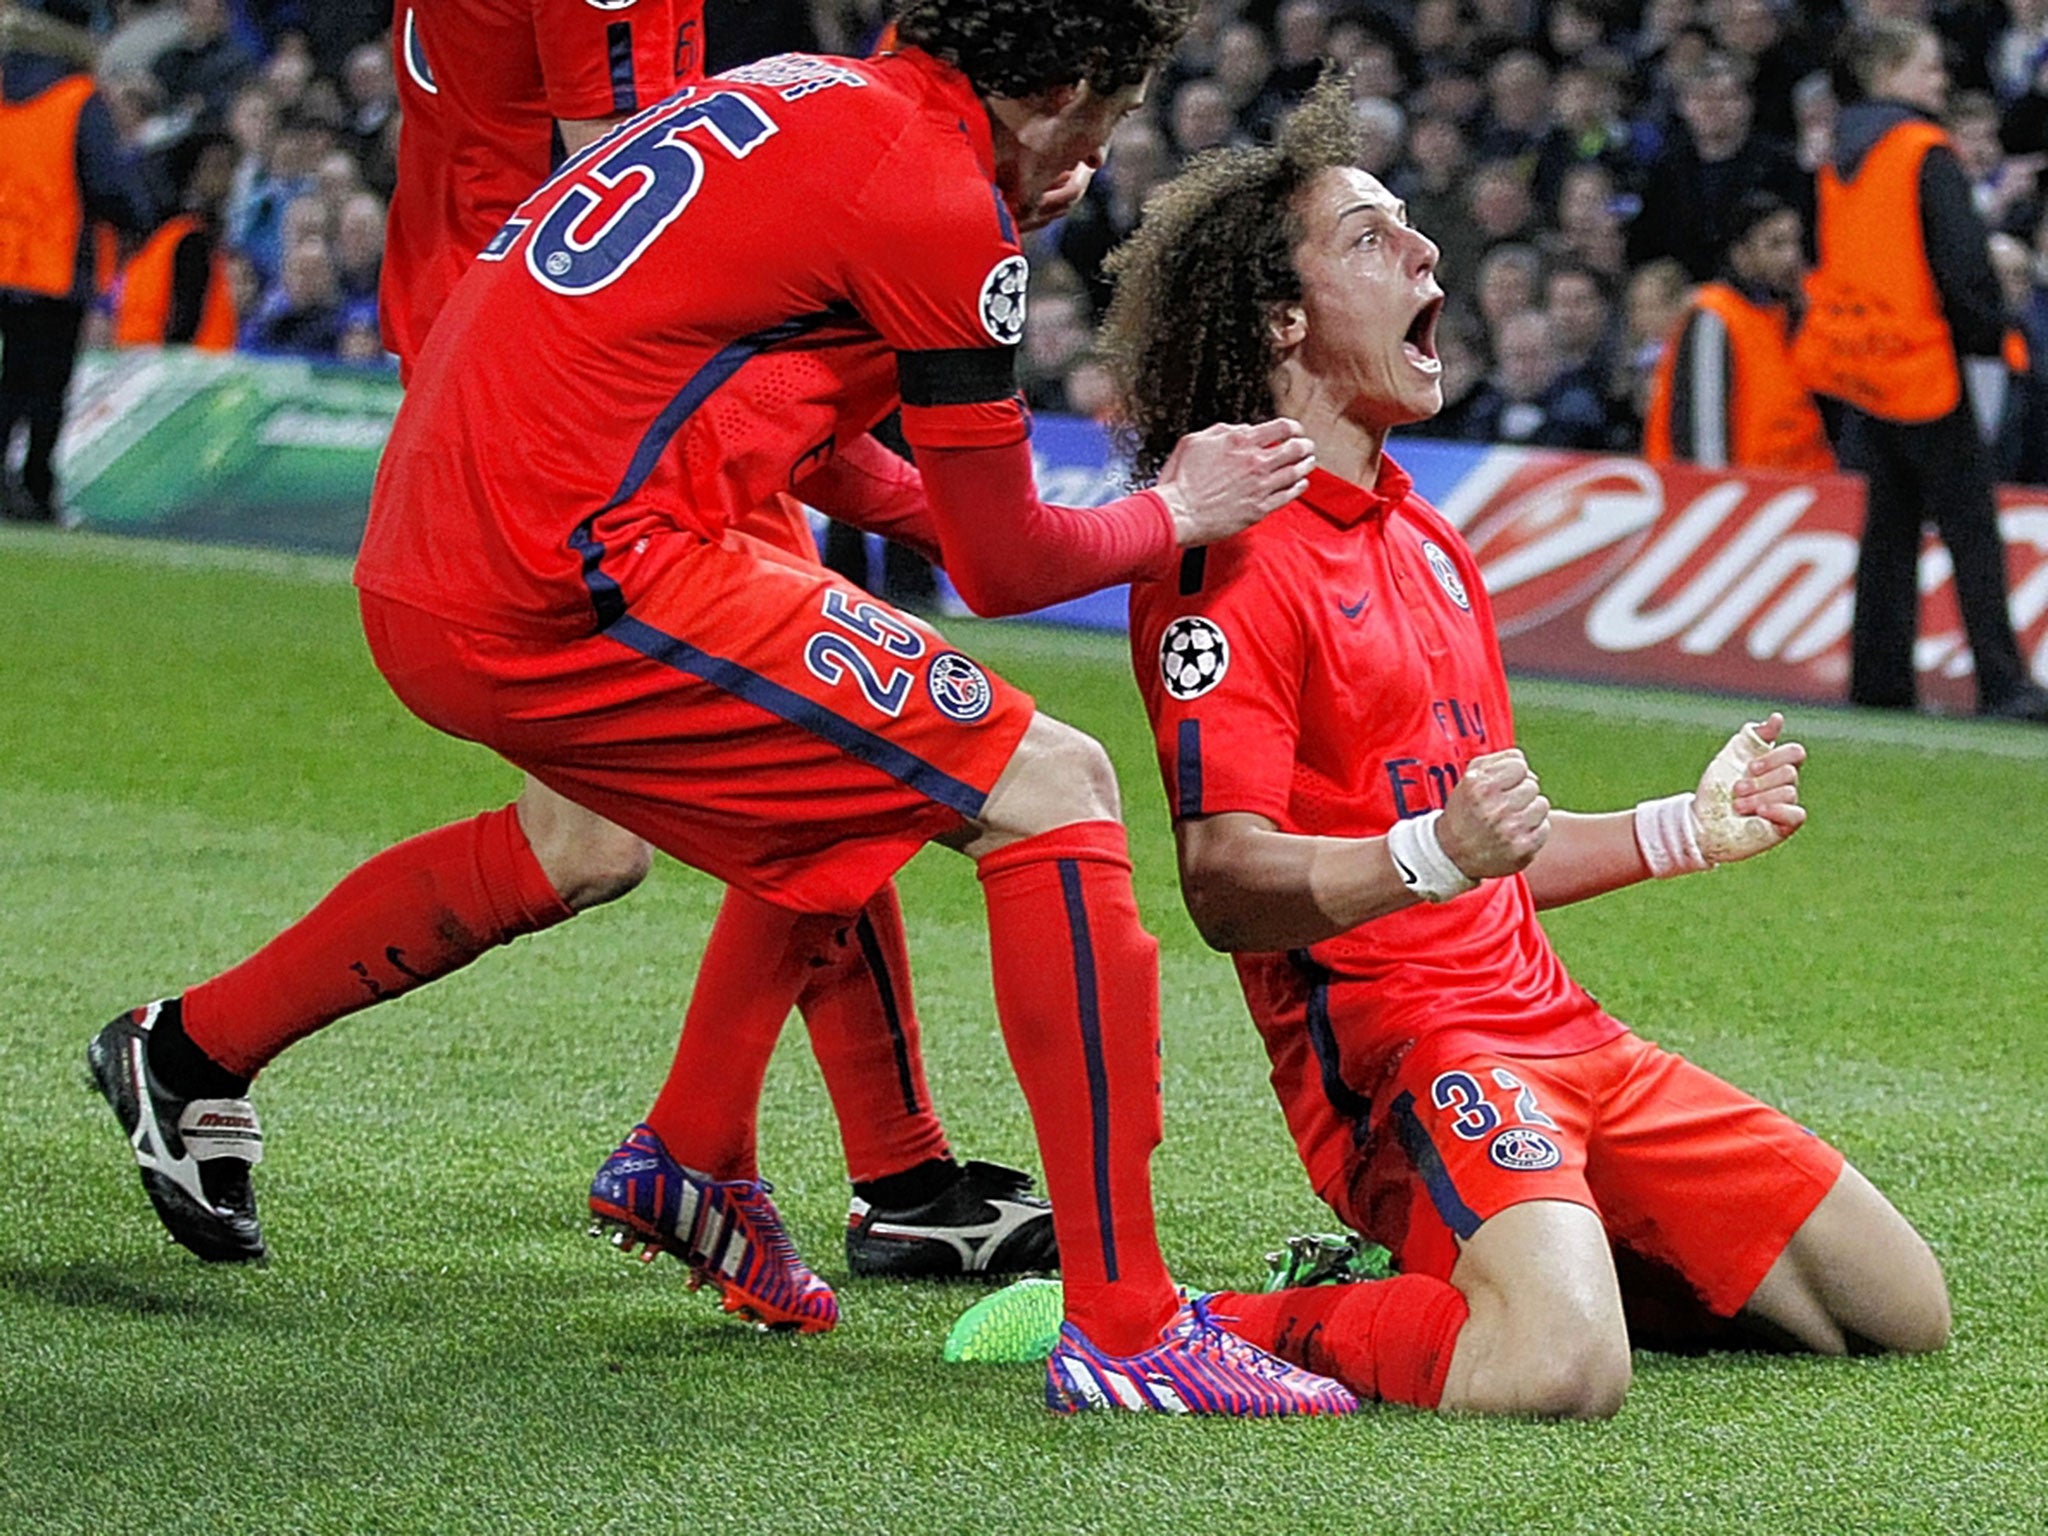 David Luiz celebrates the goal that took the game to extra-time against his old club Chelsea